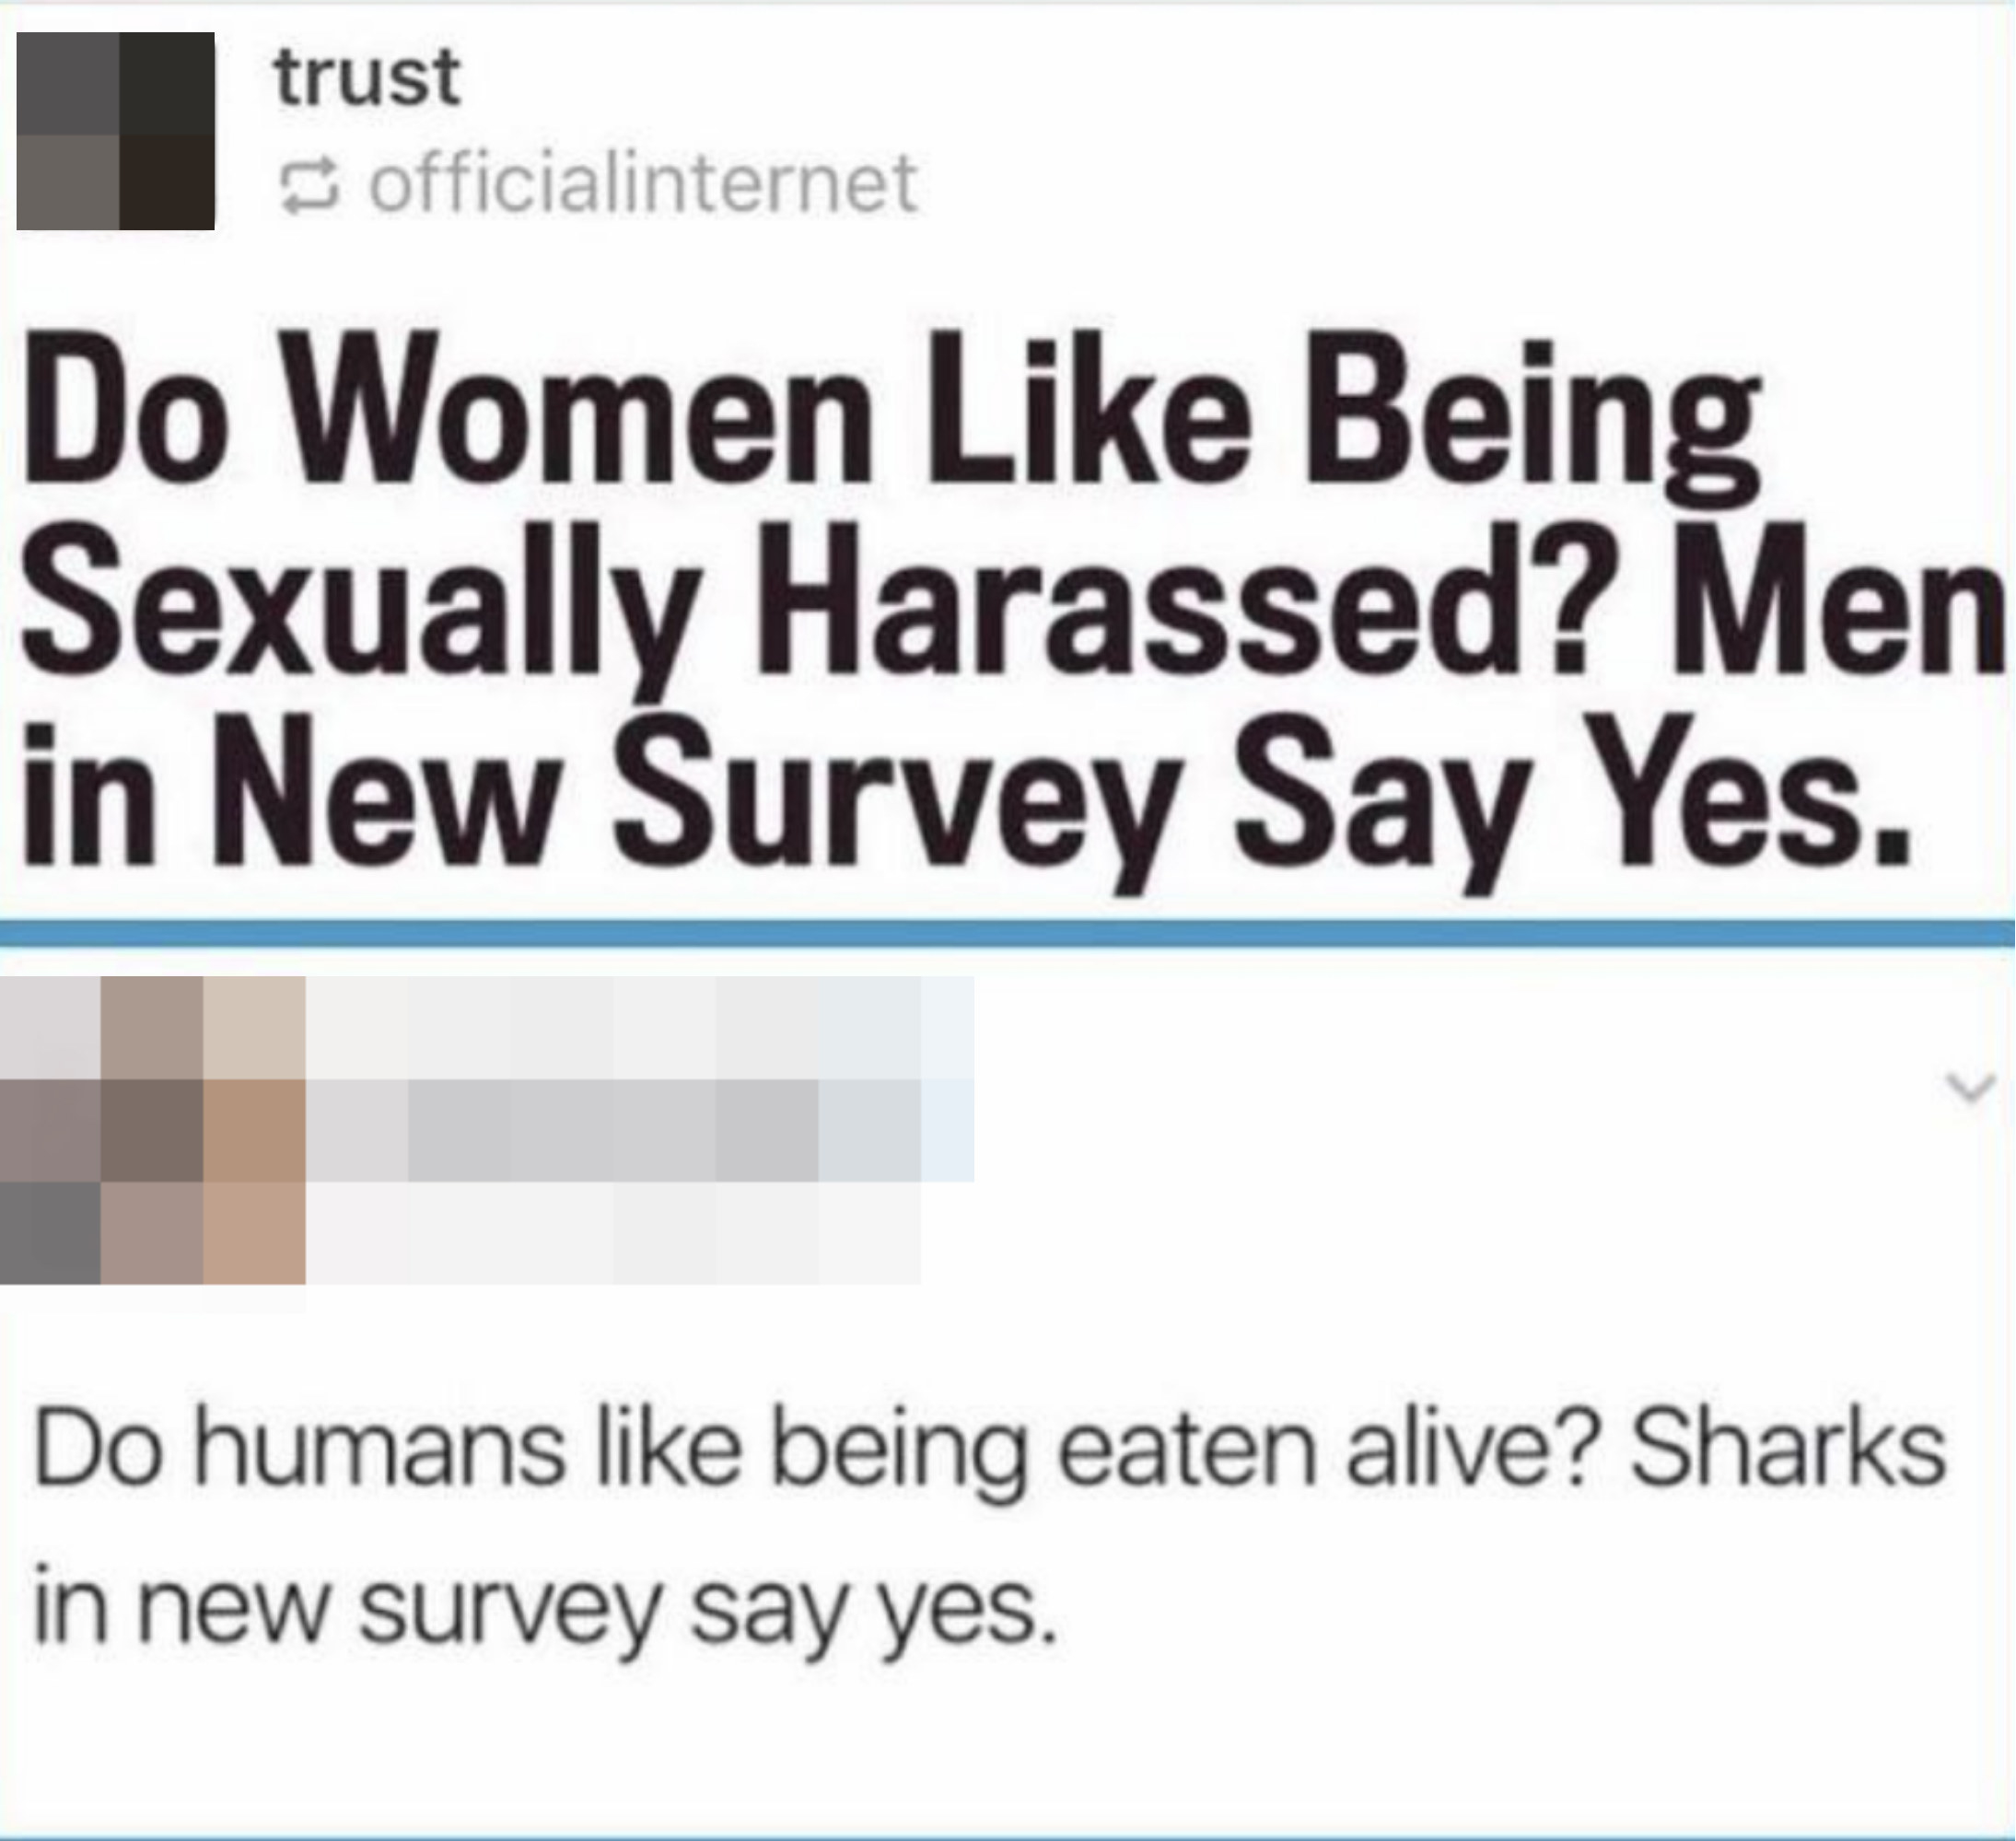 do women like being sexually harassed, men in new survey say yes. commenter replies, do humans like being eaten alive, sharks in new survey say yes